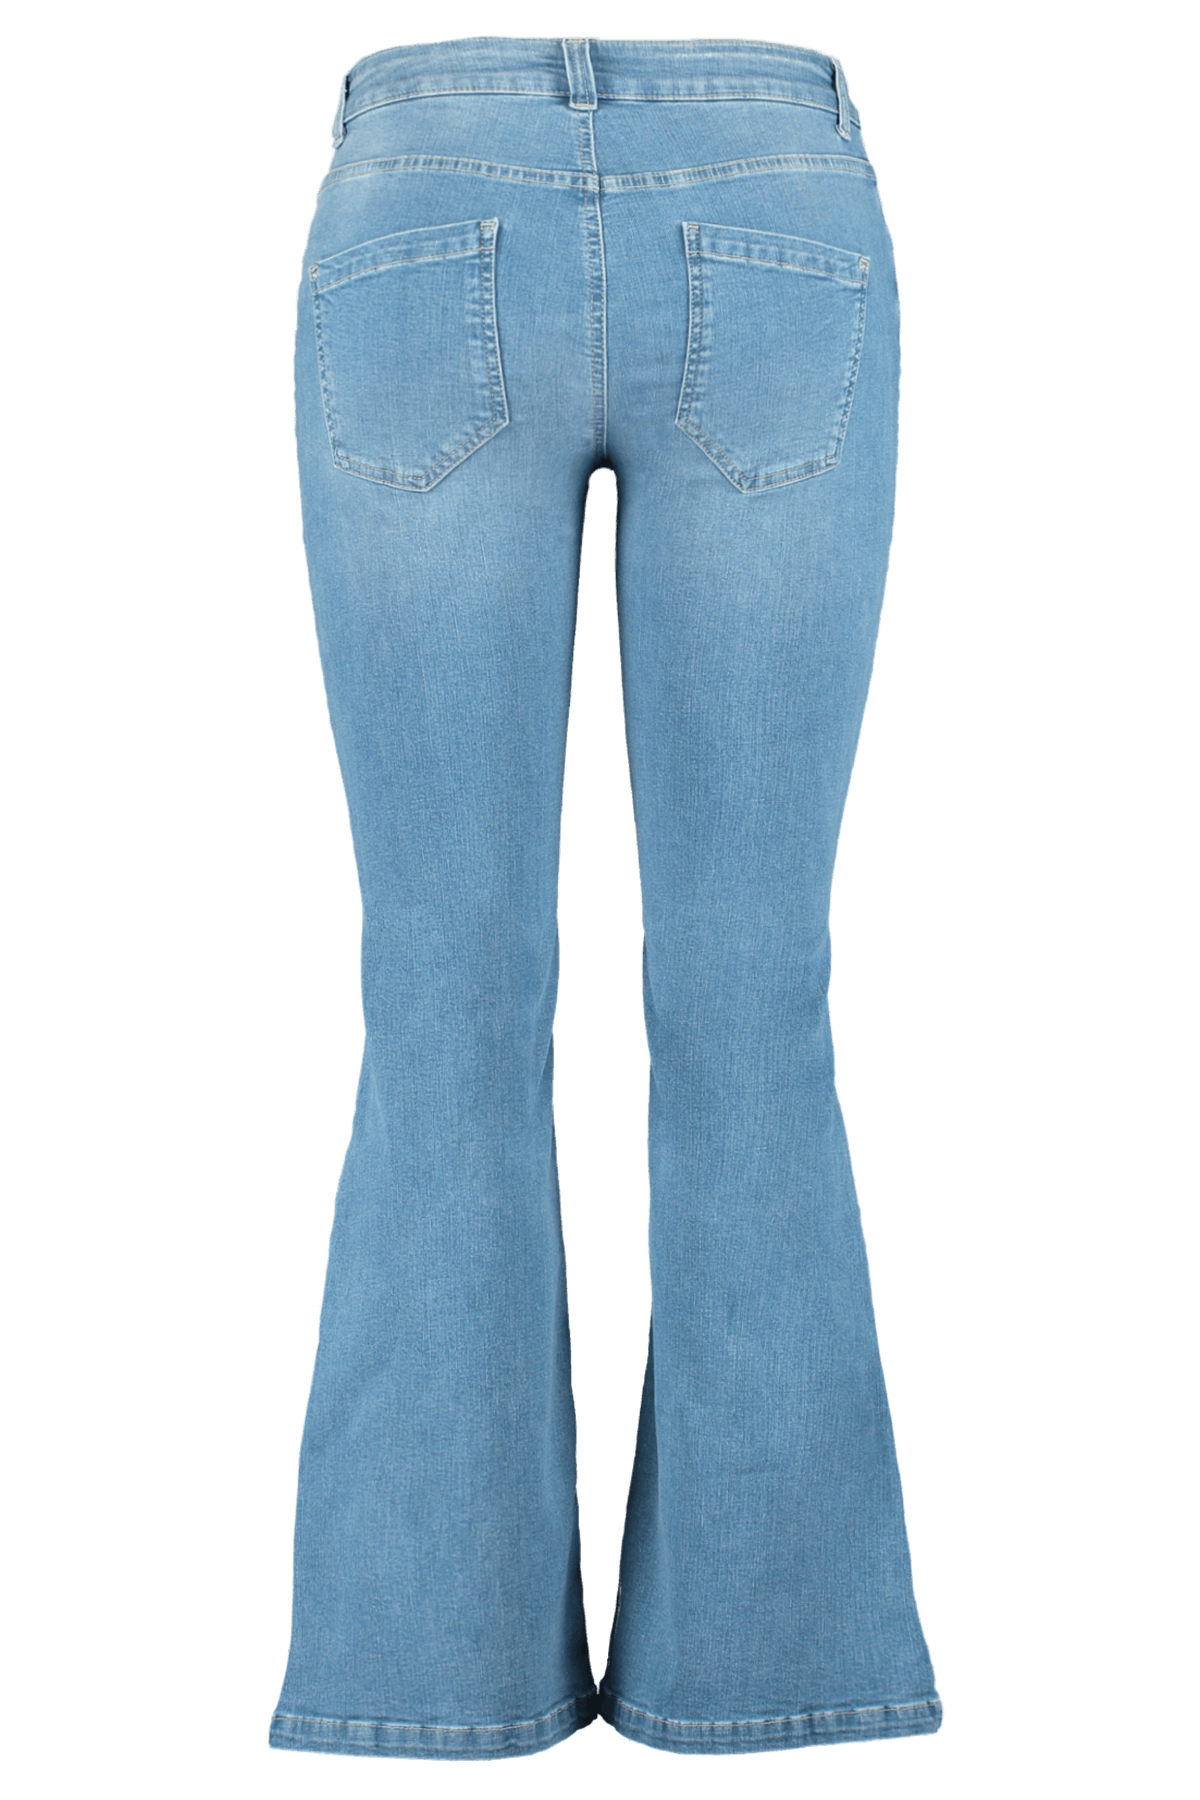 Flared jeans image 2